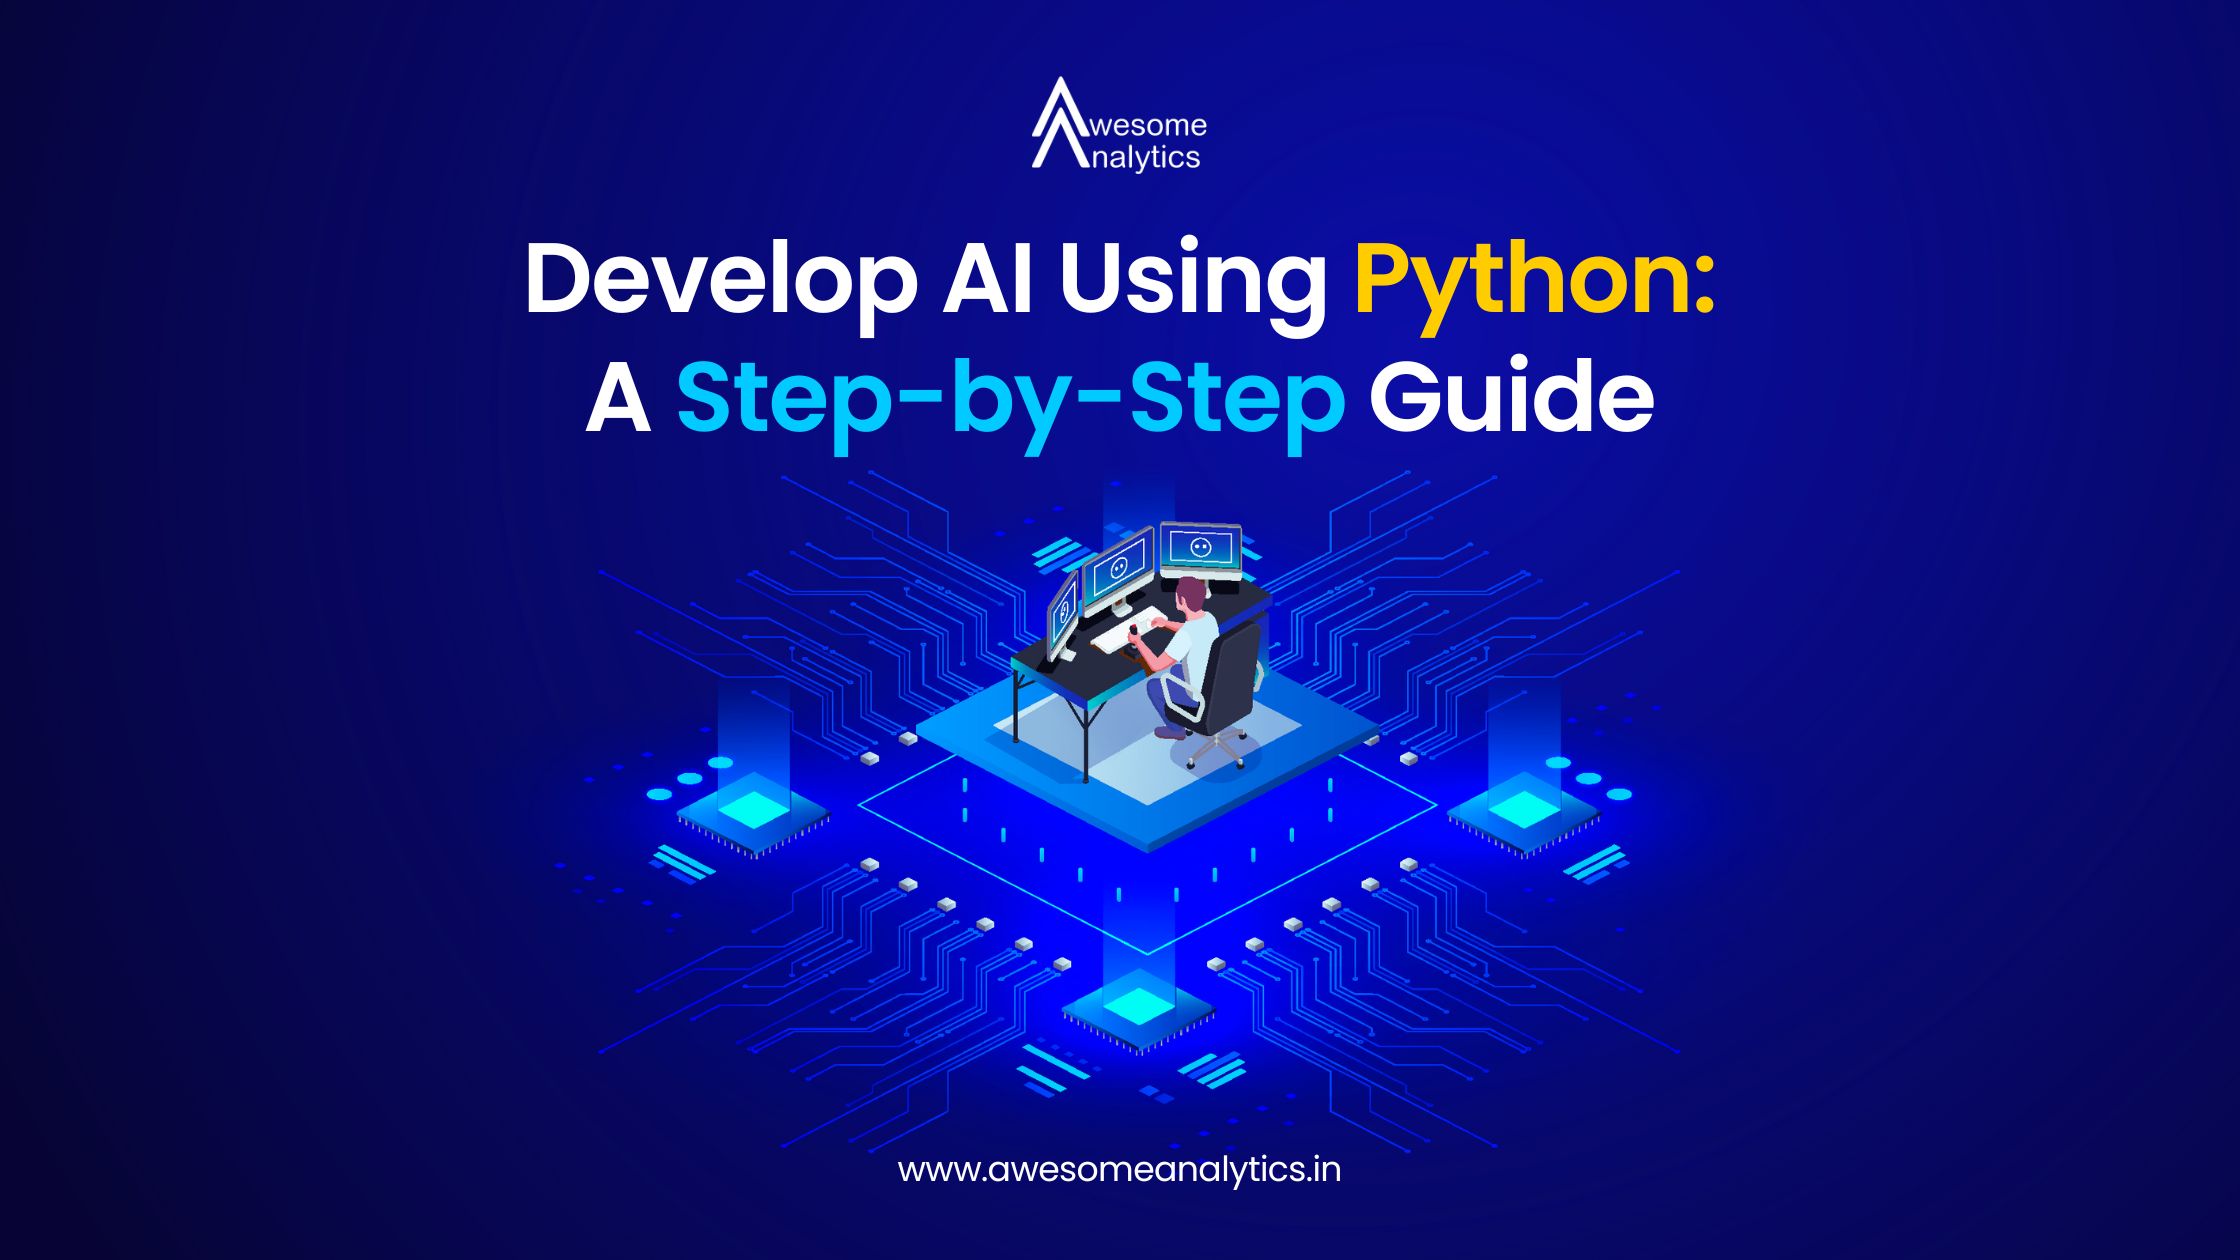 Develop AI Using Python: A Step-by-Step Guide